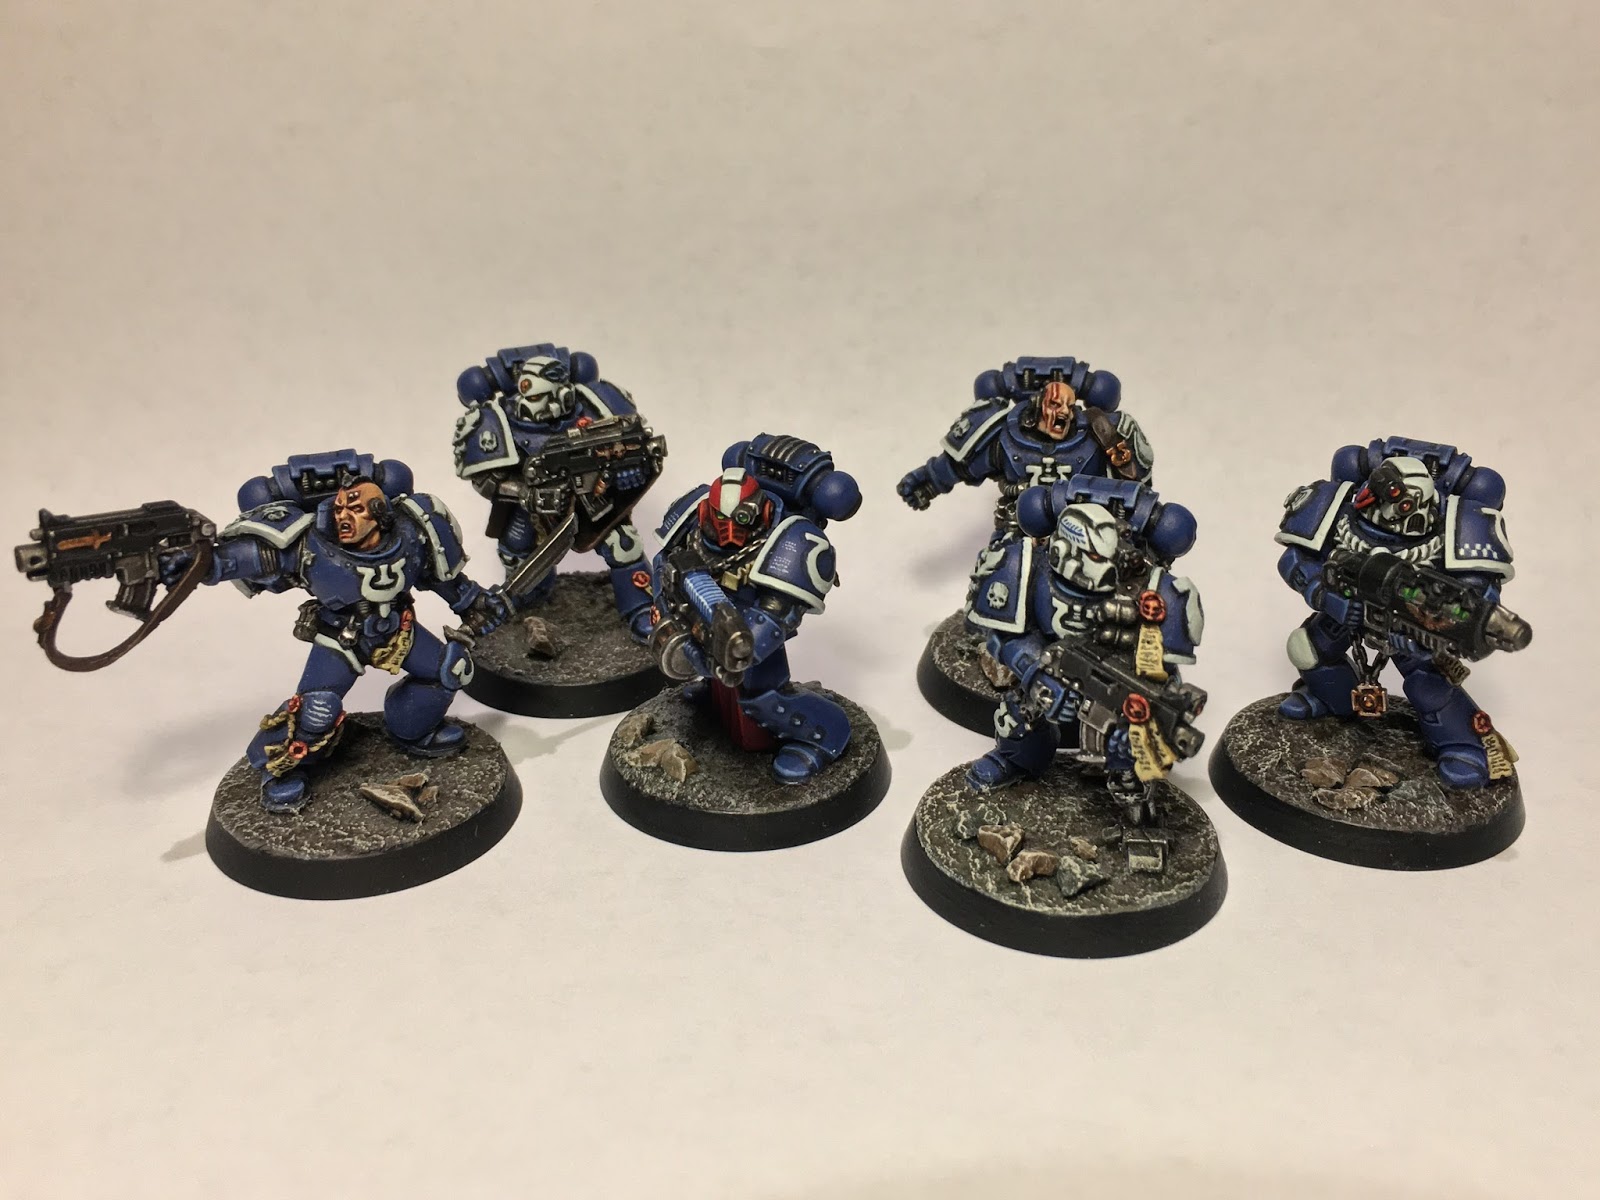 Ever since I first saw the Tyrannic War Veteran models back in 2007, I was ...